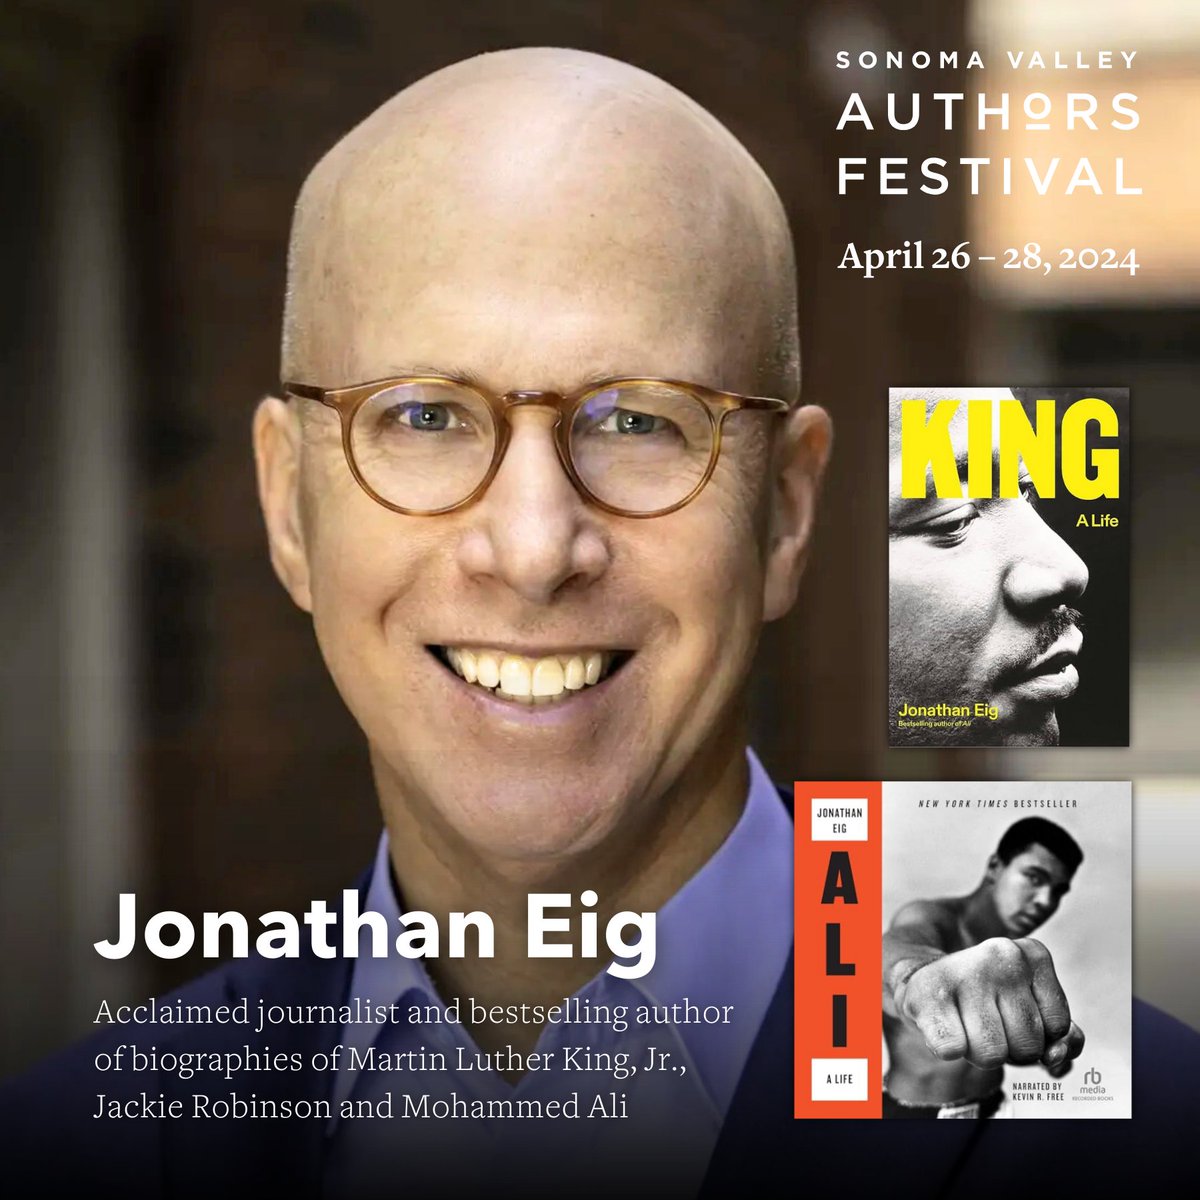 Join me this wkd at the 7th Annual @svauthorsfest --and for my birthday! I'll be doing two talks -- #MLK and #MuhammadAli. Get passes at svauthorsfest.org #SVAF